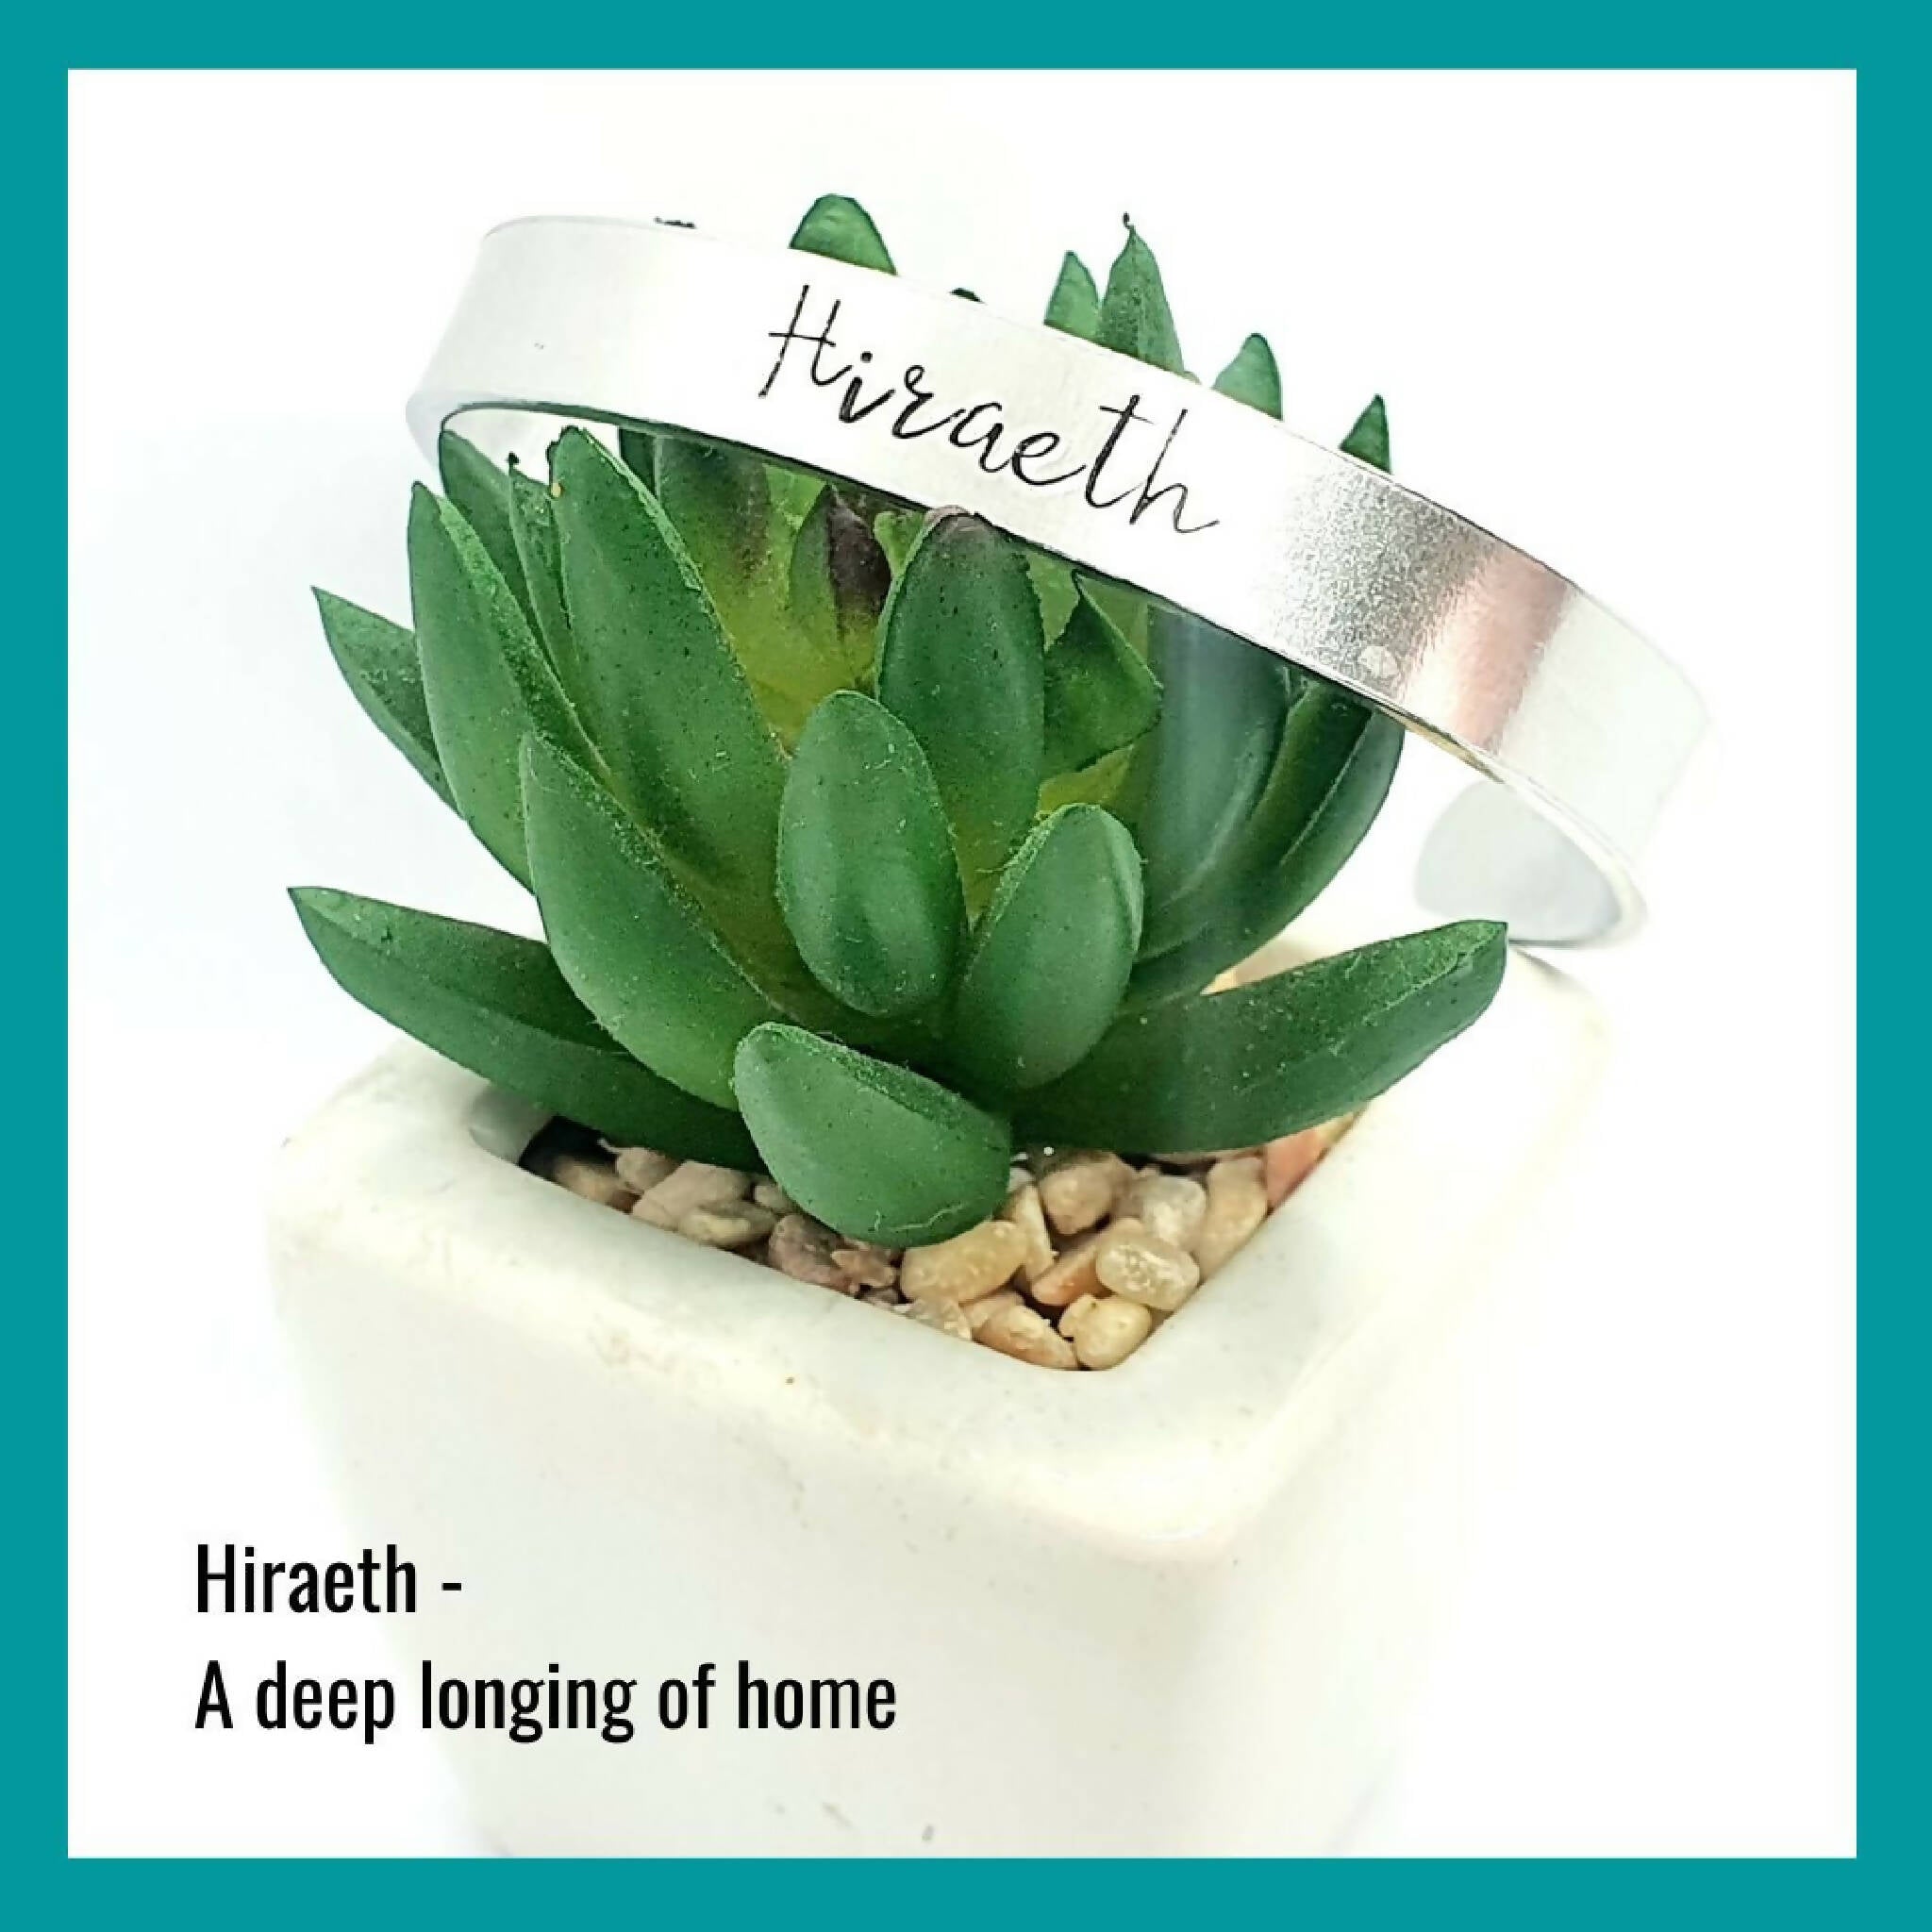 Hiraeth Welsh Cuff Longing For Home